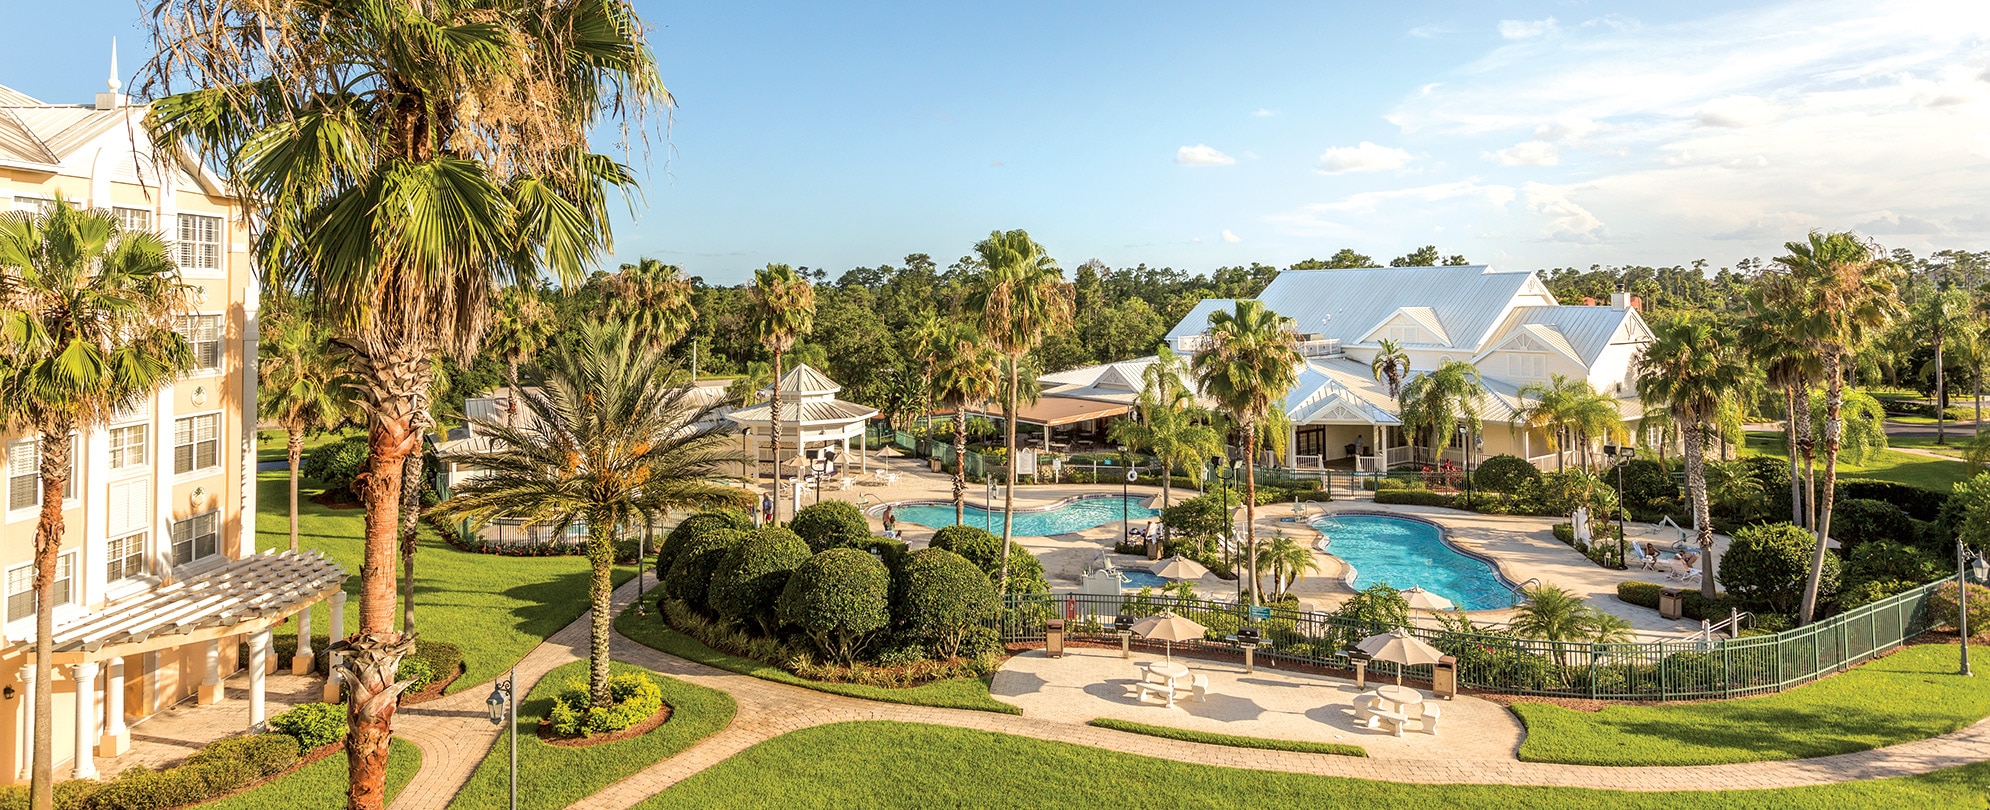 The outdoor pools and exterior of WorldMark Kingstown Reef, a Key West-style timeshare resort in Orlando, Florida.